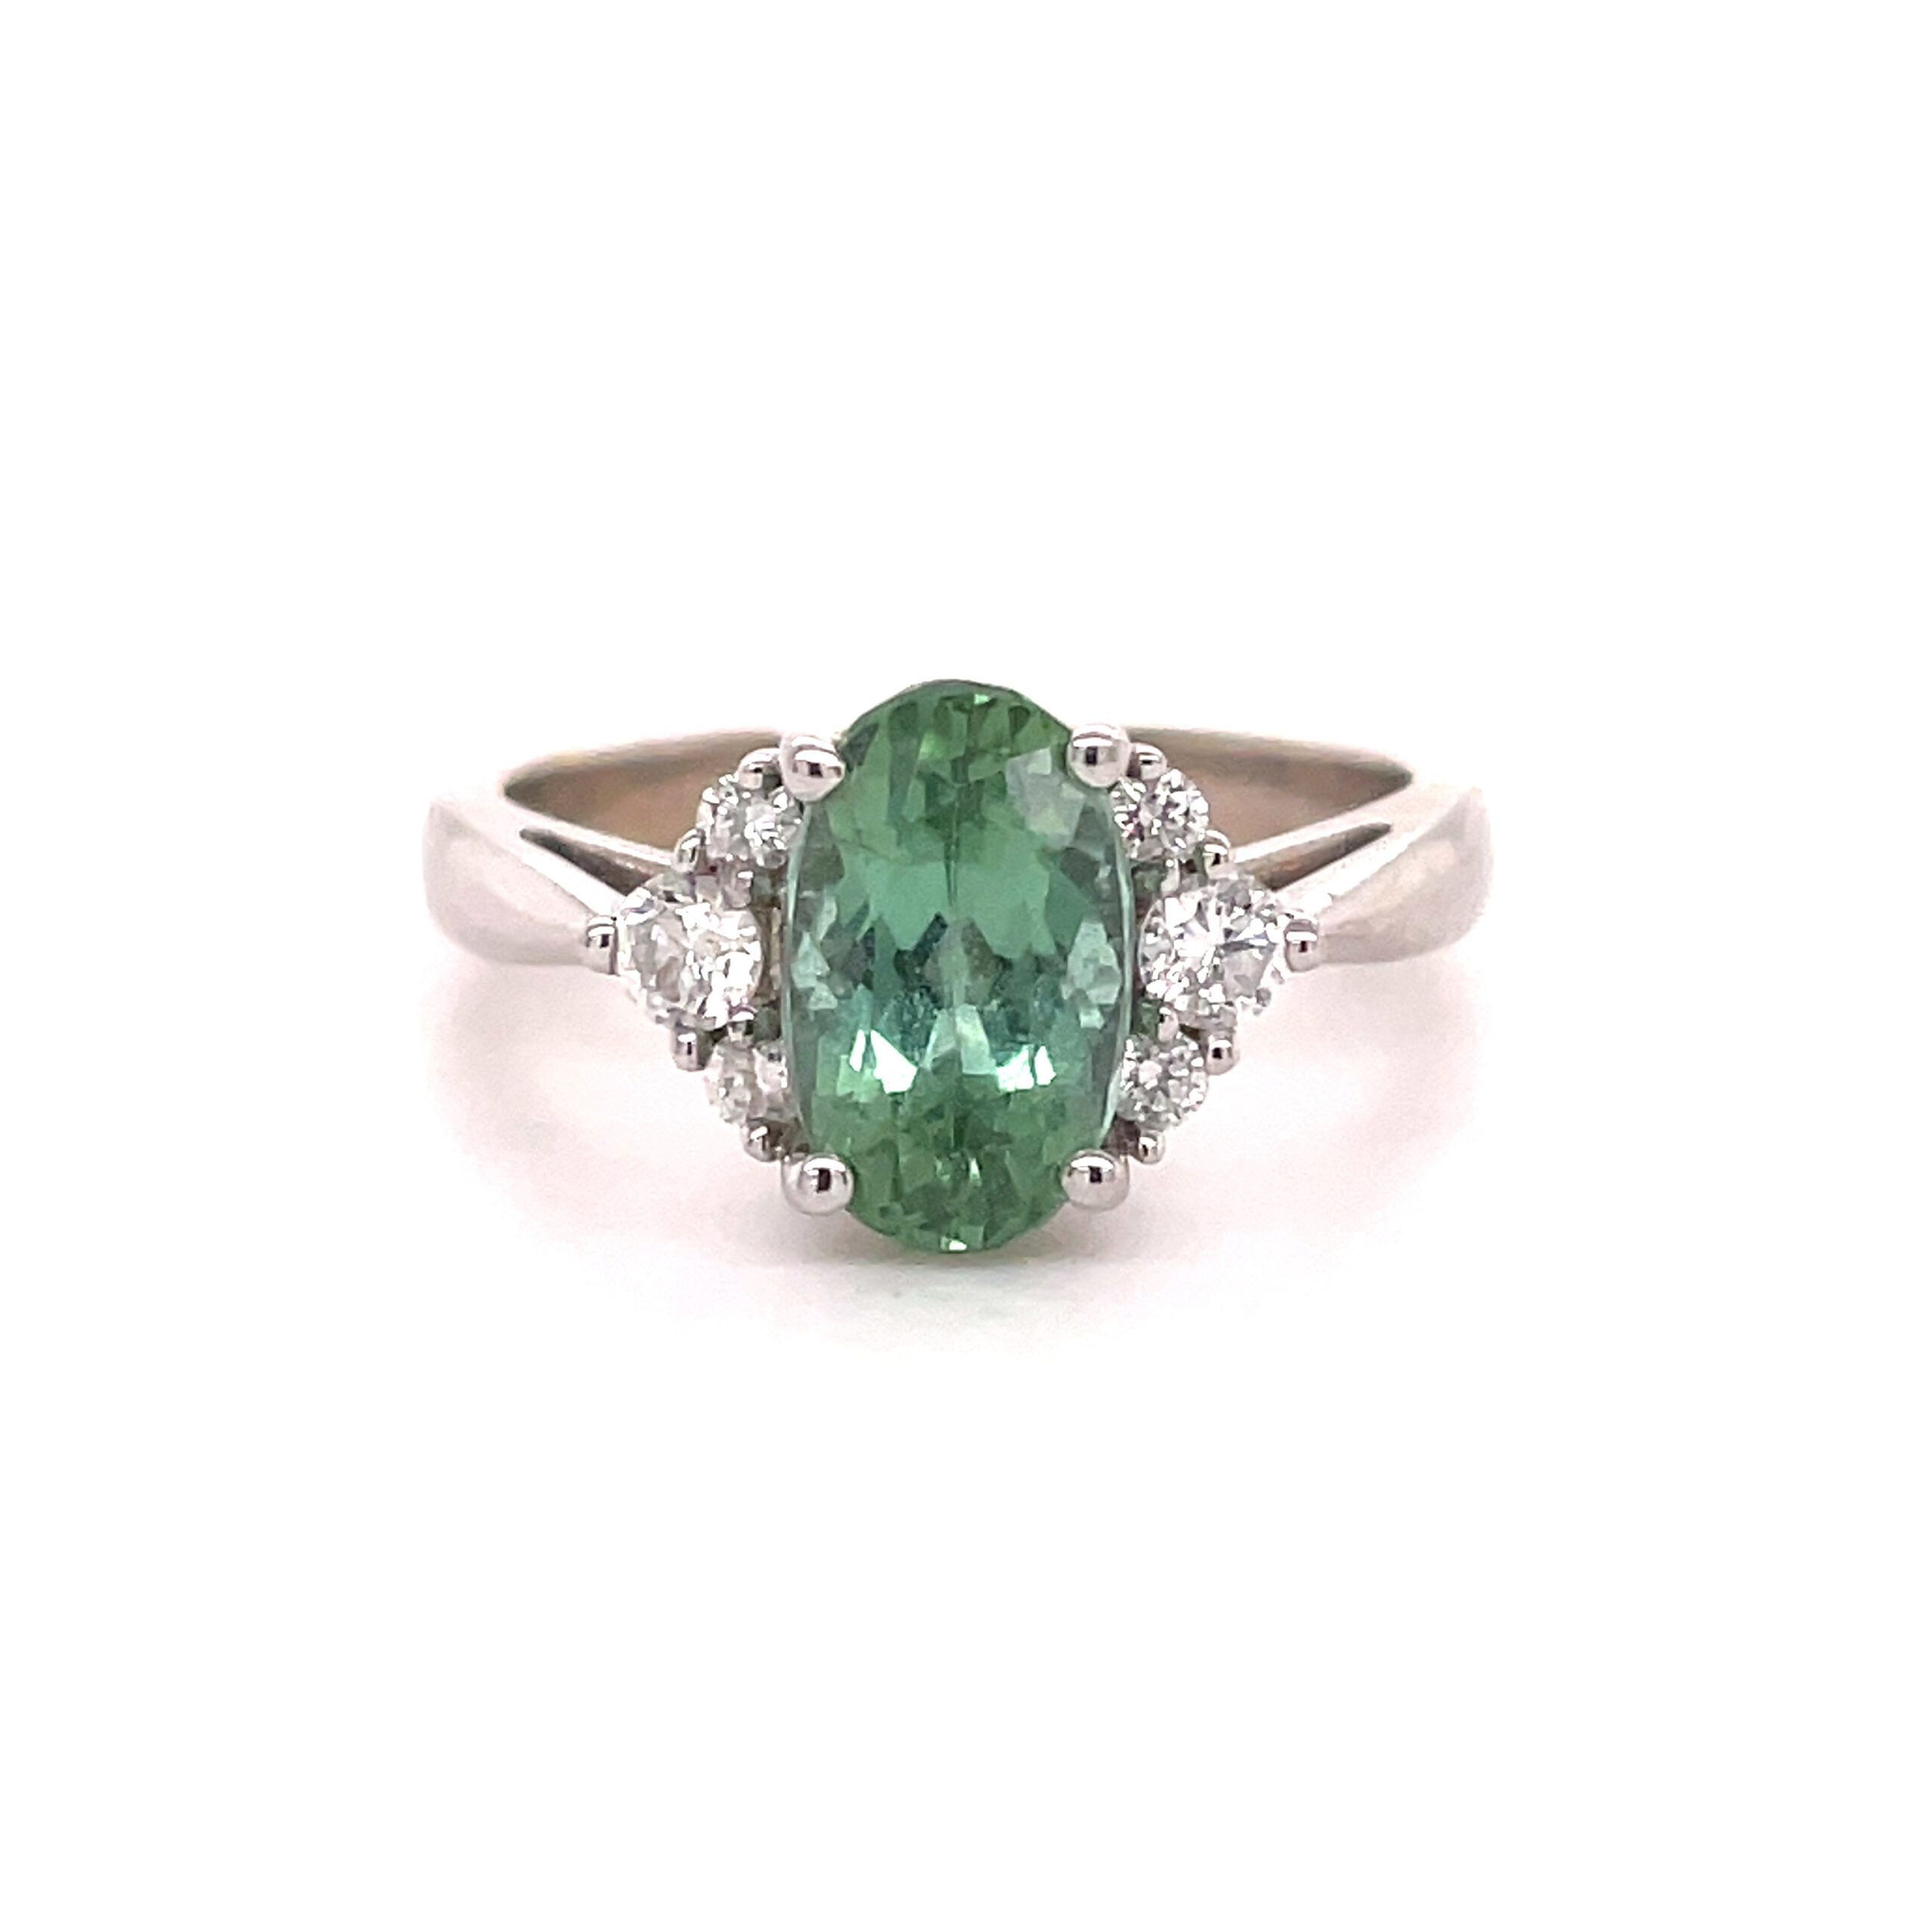 Pear shaped green tourmaline engagement ring set 14k rose gold V shape –  WILLWORK JEWELRY